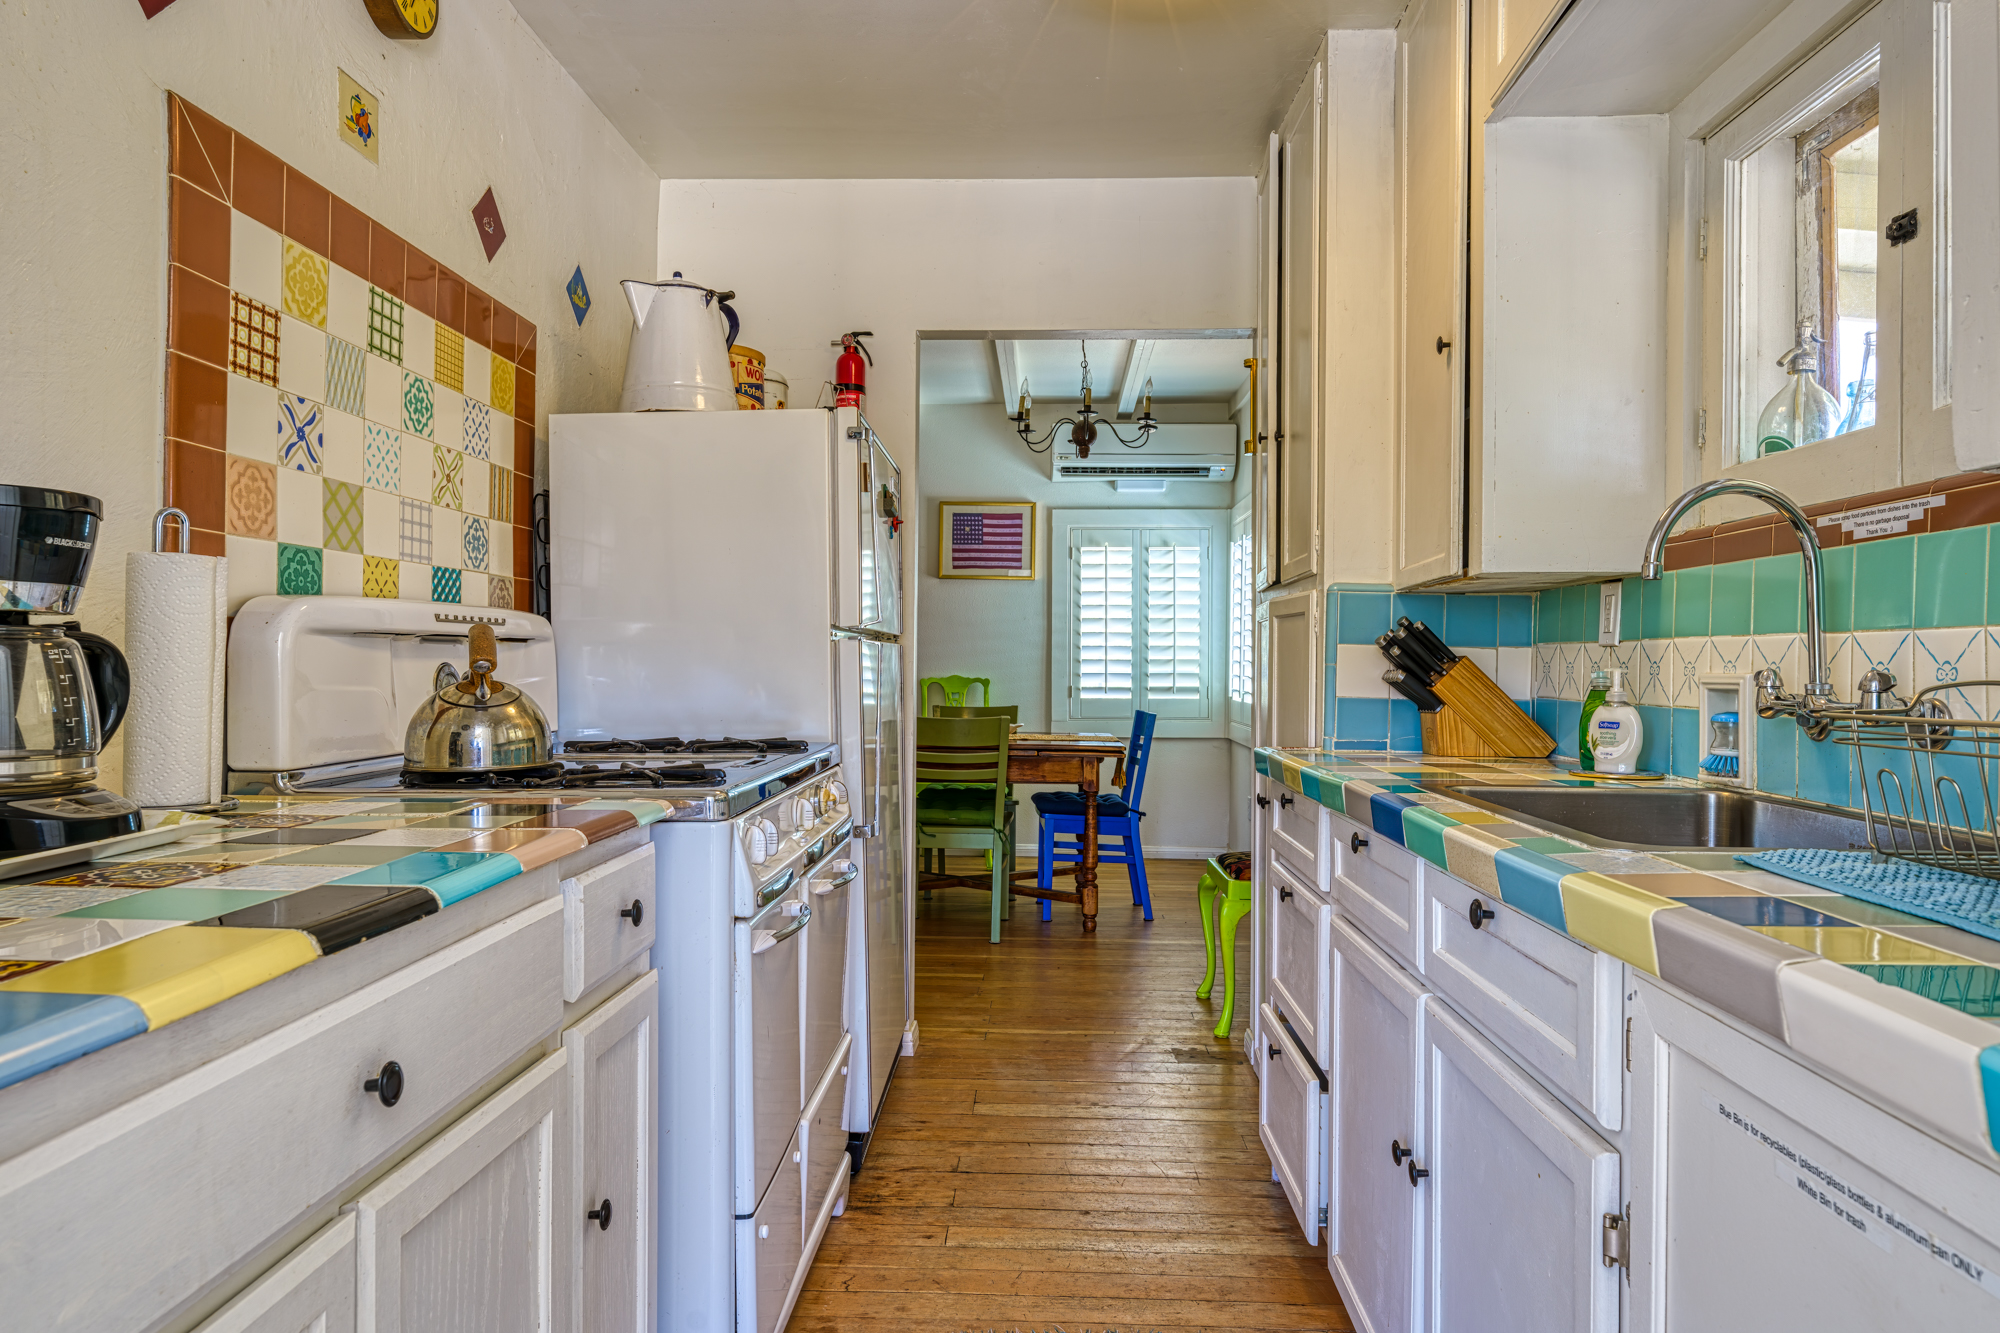 A classic old timey kitchen with tile countertops, 50s to 60s style stove and fridge with fire extinguisher on top of the fridge. Coffee pot, tea kettle, paper towel holder to the left by the stove and fridge with kitchen sink, knives, dish rack, and trash recycling combo to the right.